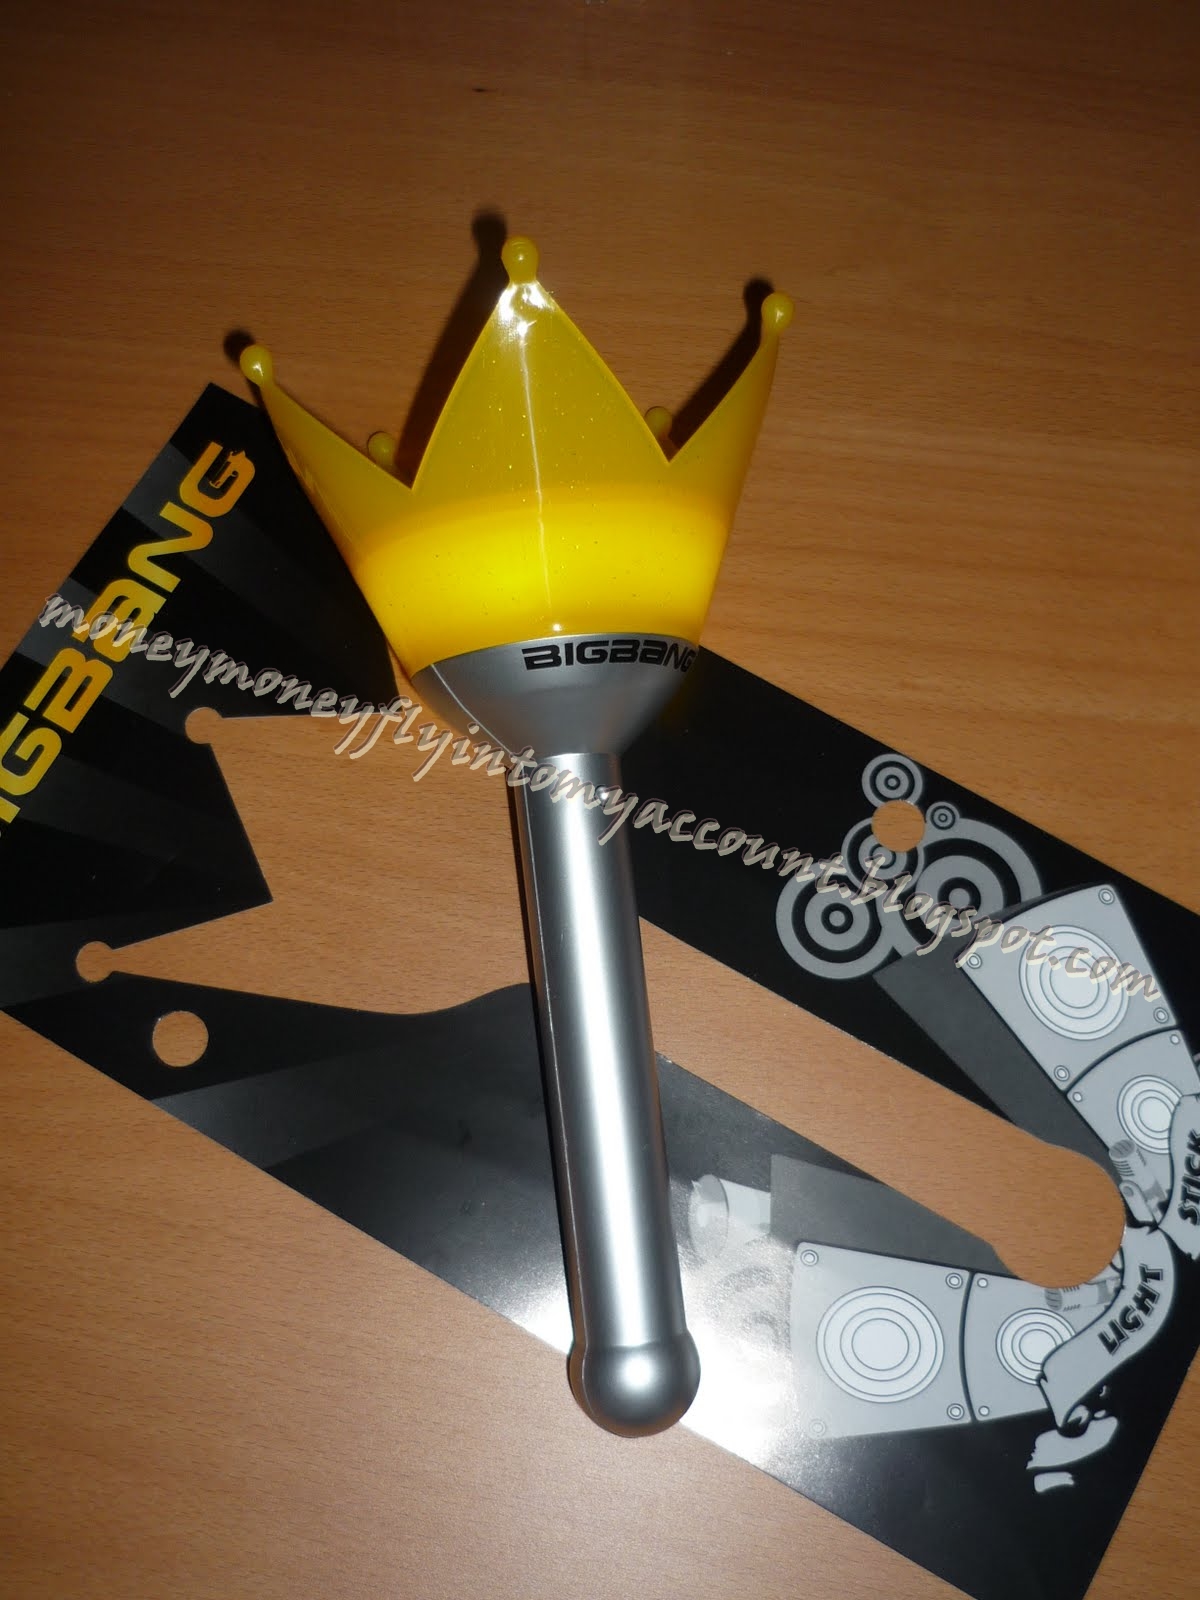 The other side of my world: BIG BANG LIGHTSTICK VER 2